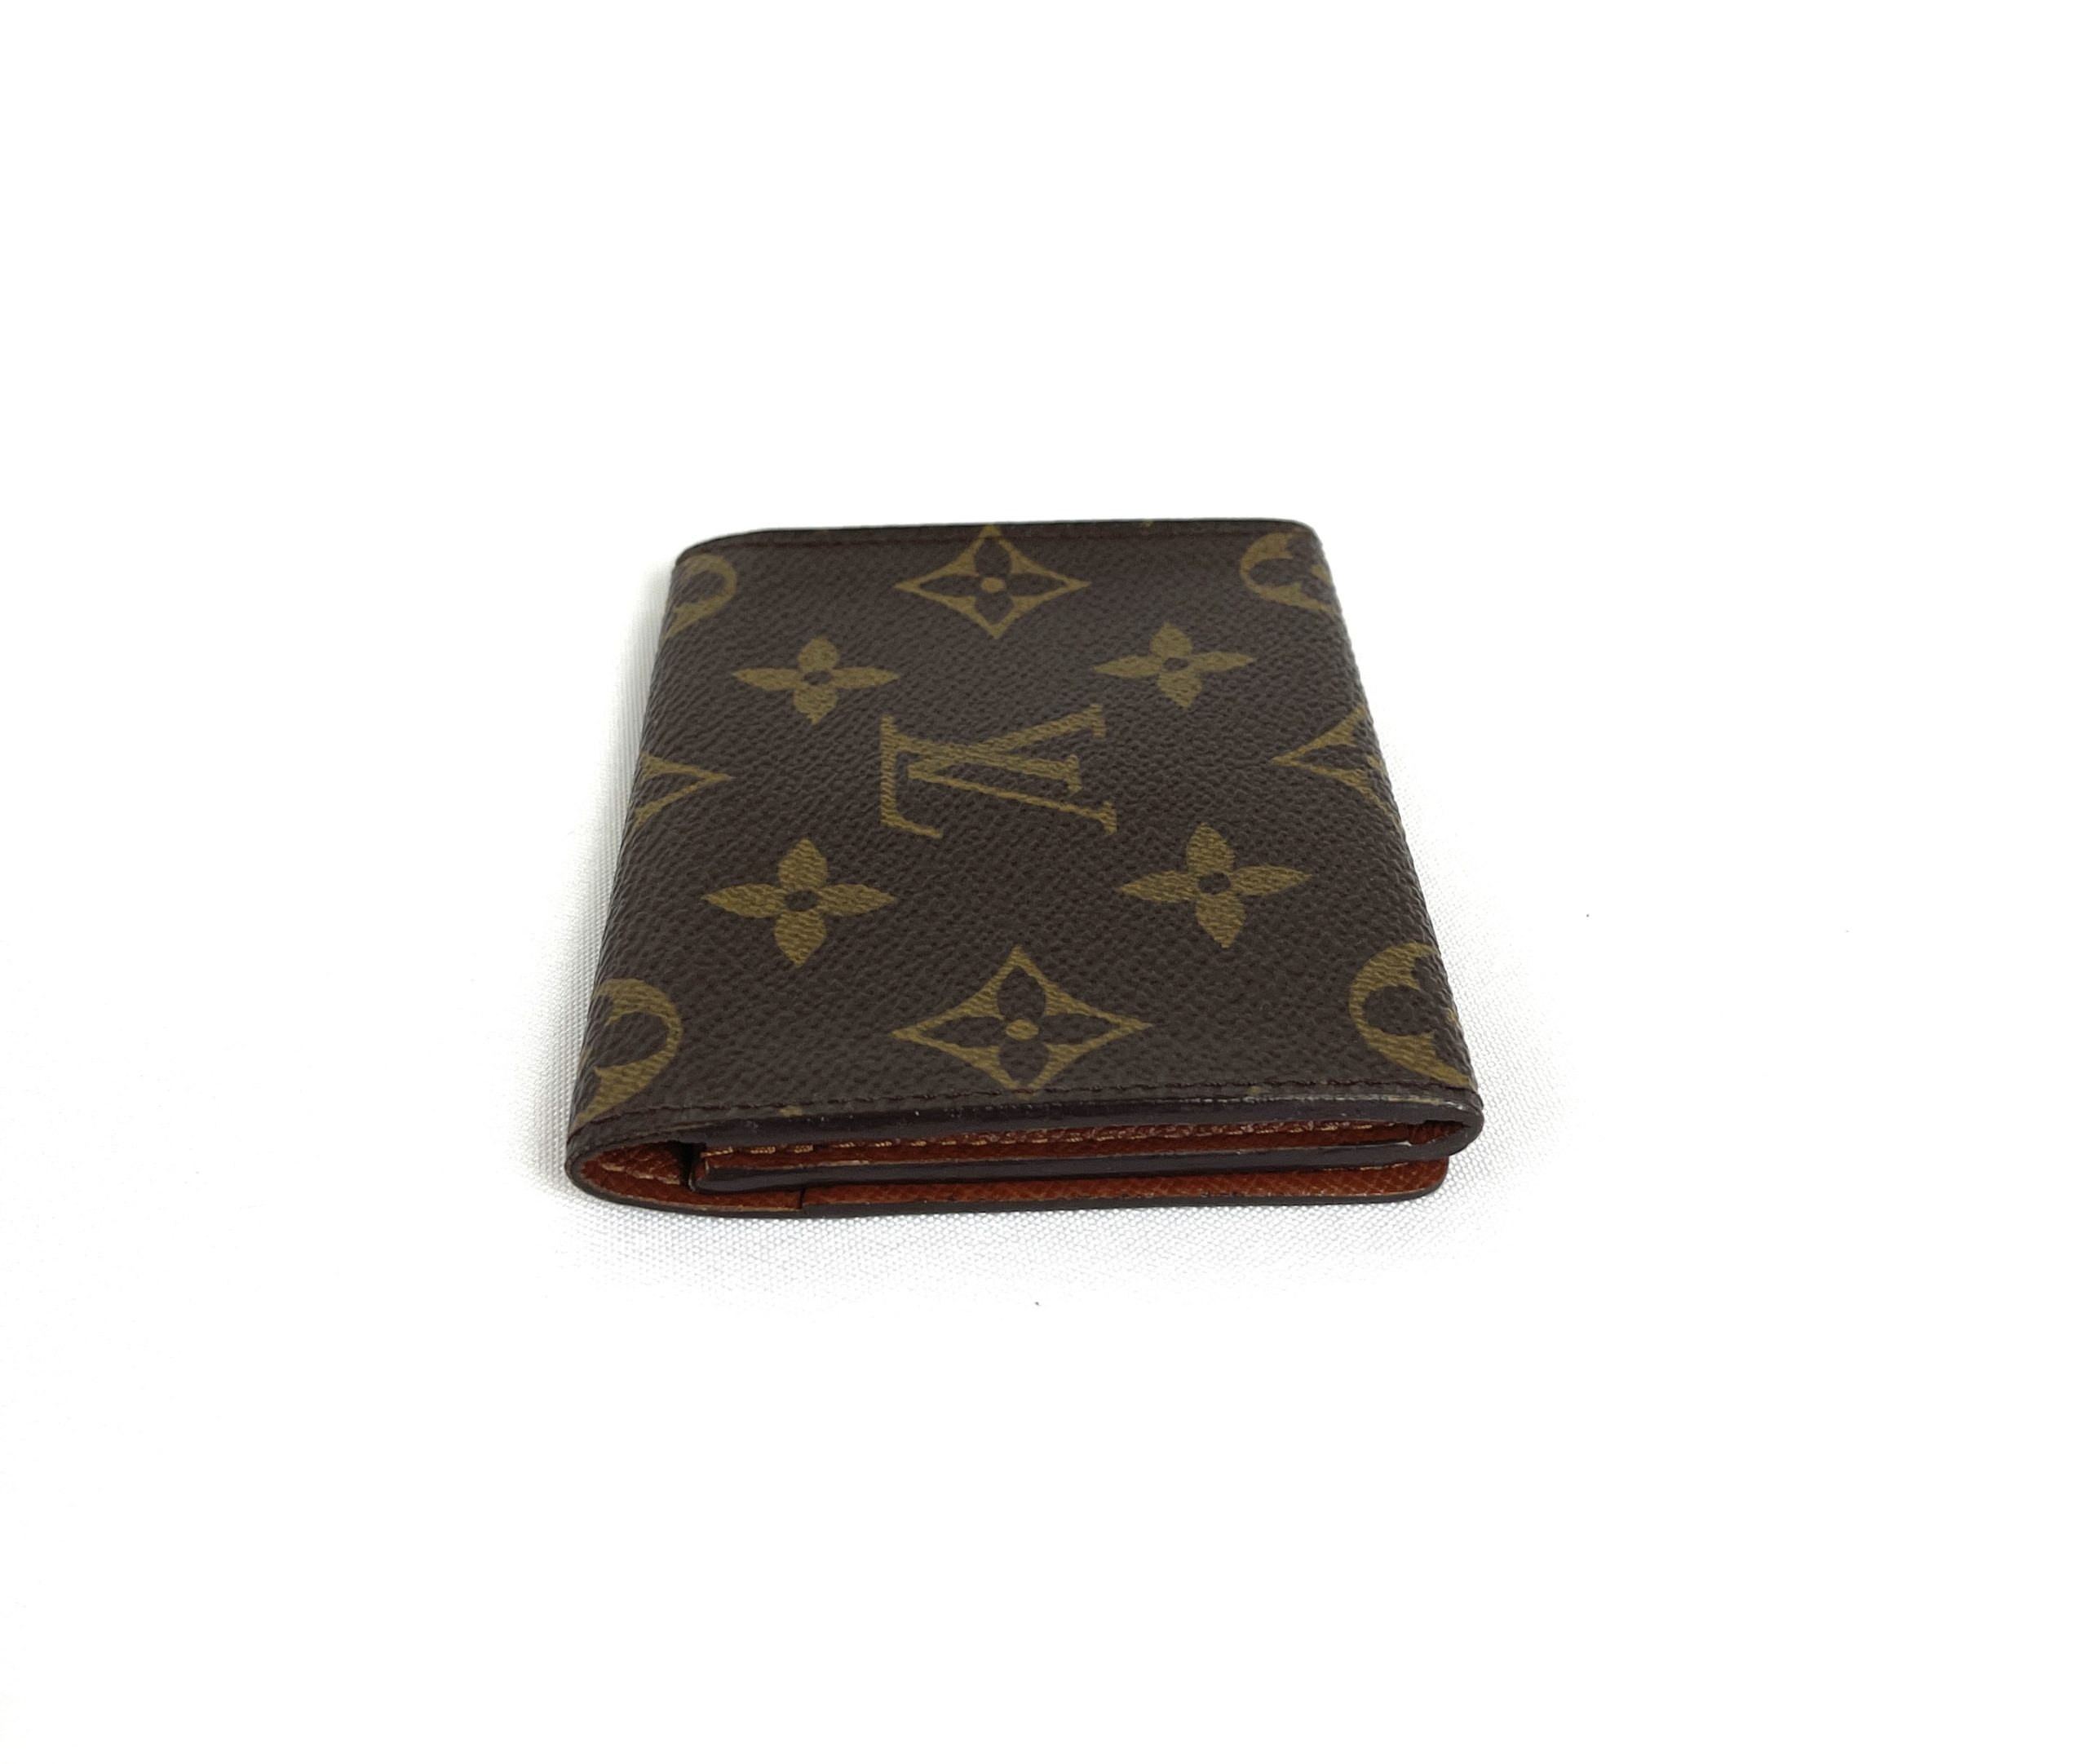 Louis Vuitton Vintage Monogram Card Holder - A World Of Goods For You, LLC